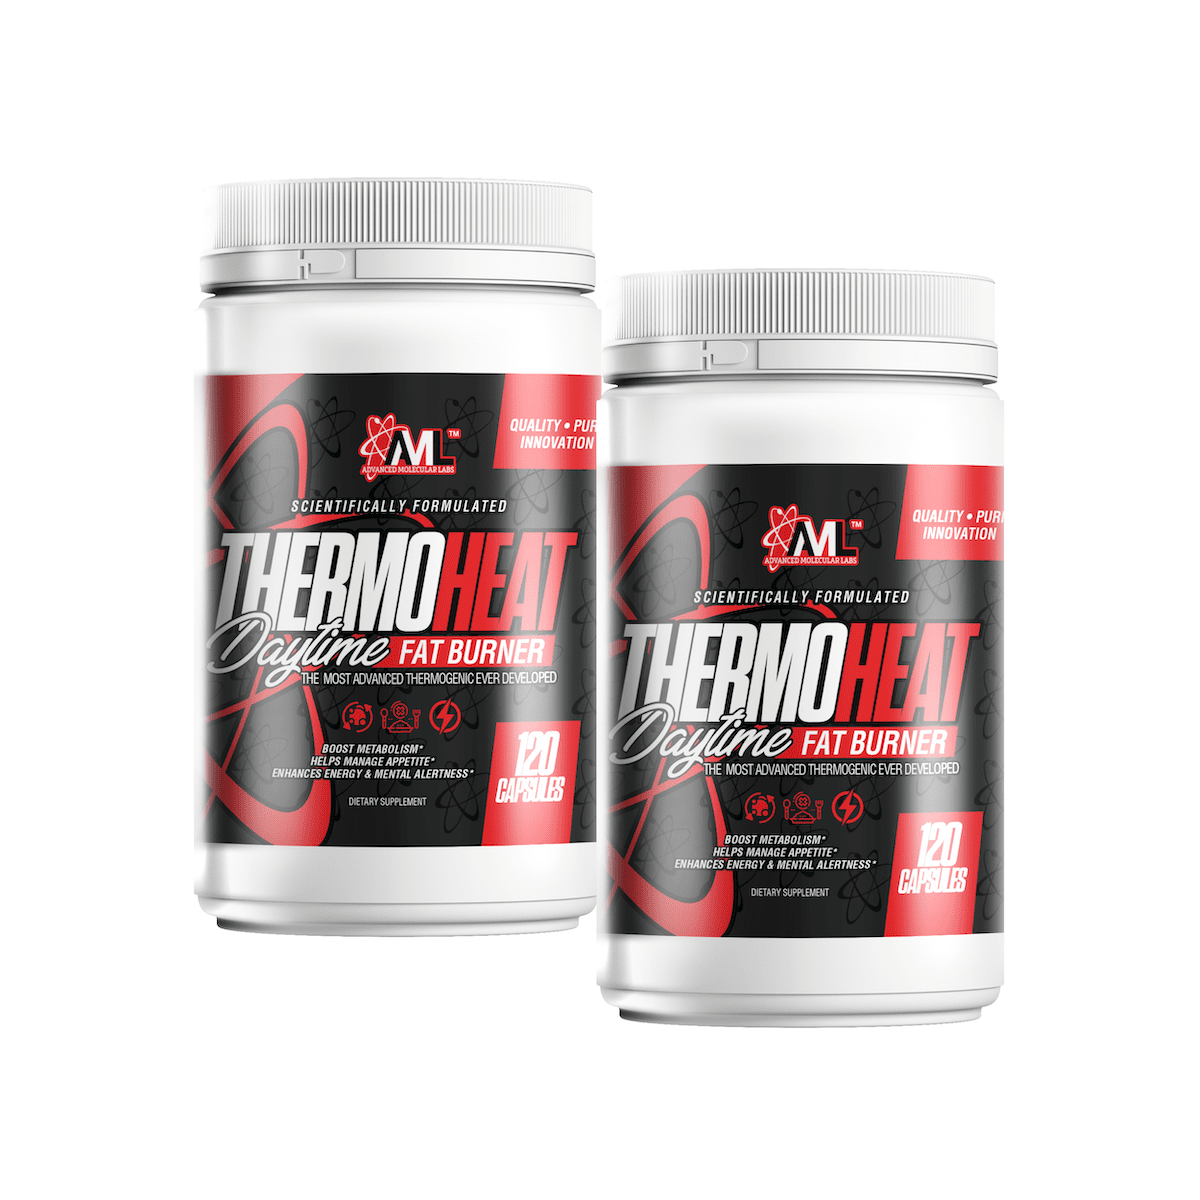 THERMO HEAT DAYTIME 2 PACK